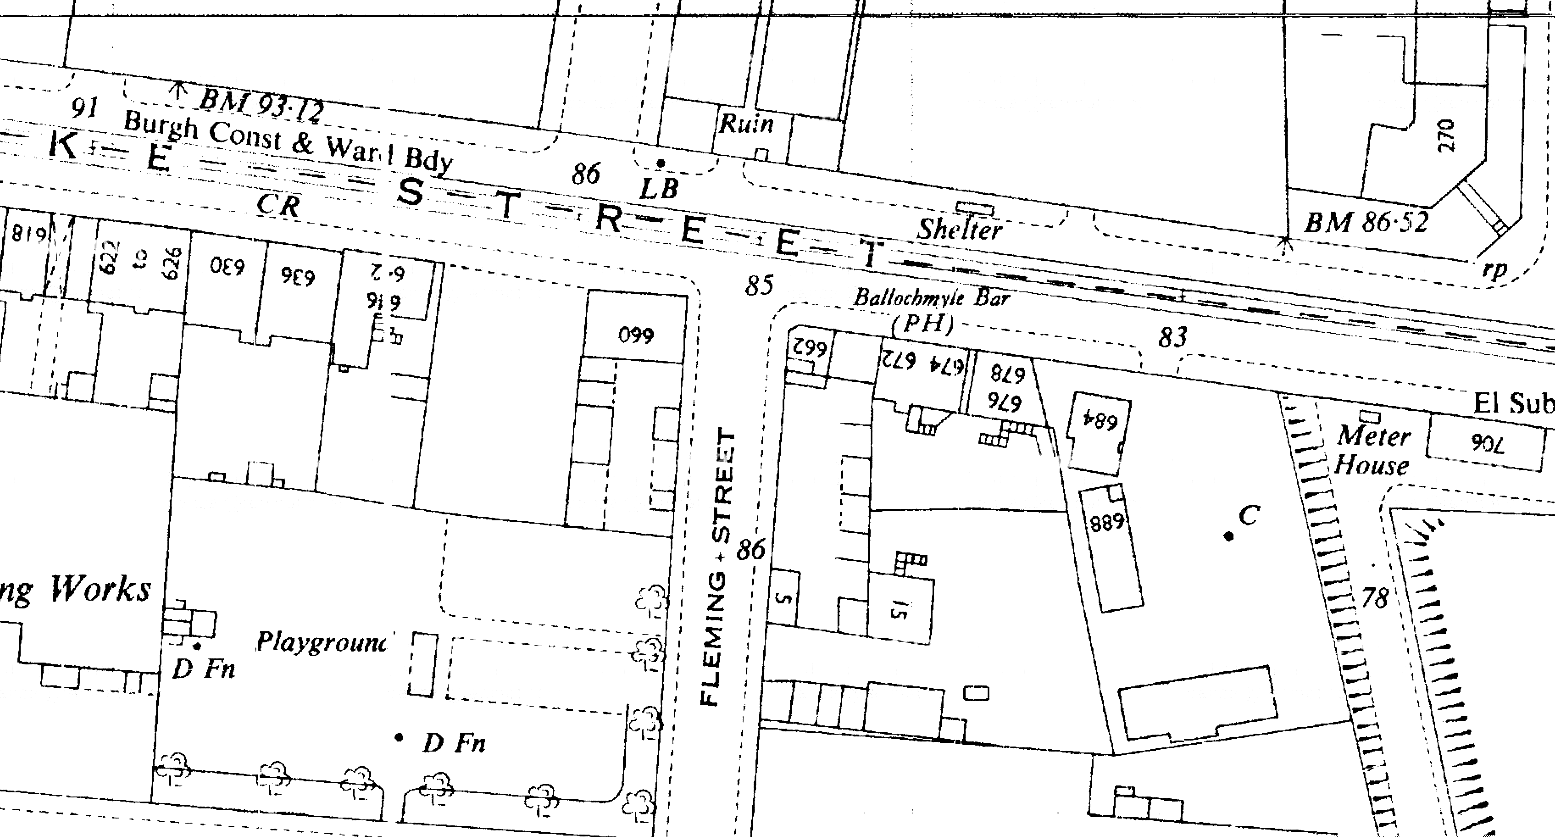 C31--Glasgow Mark 2-Fleming St at Duke St--1951-1954 OS Map Extract 1-1250.png